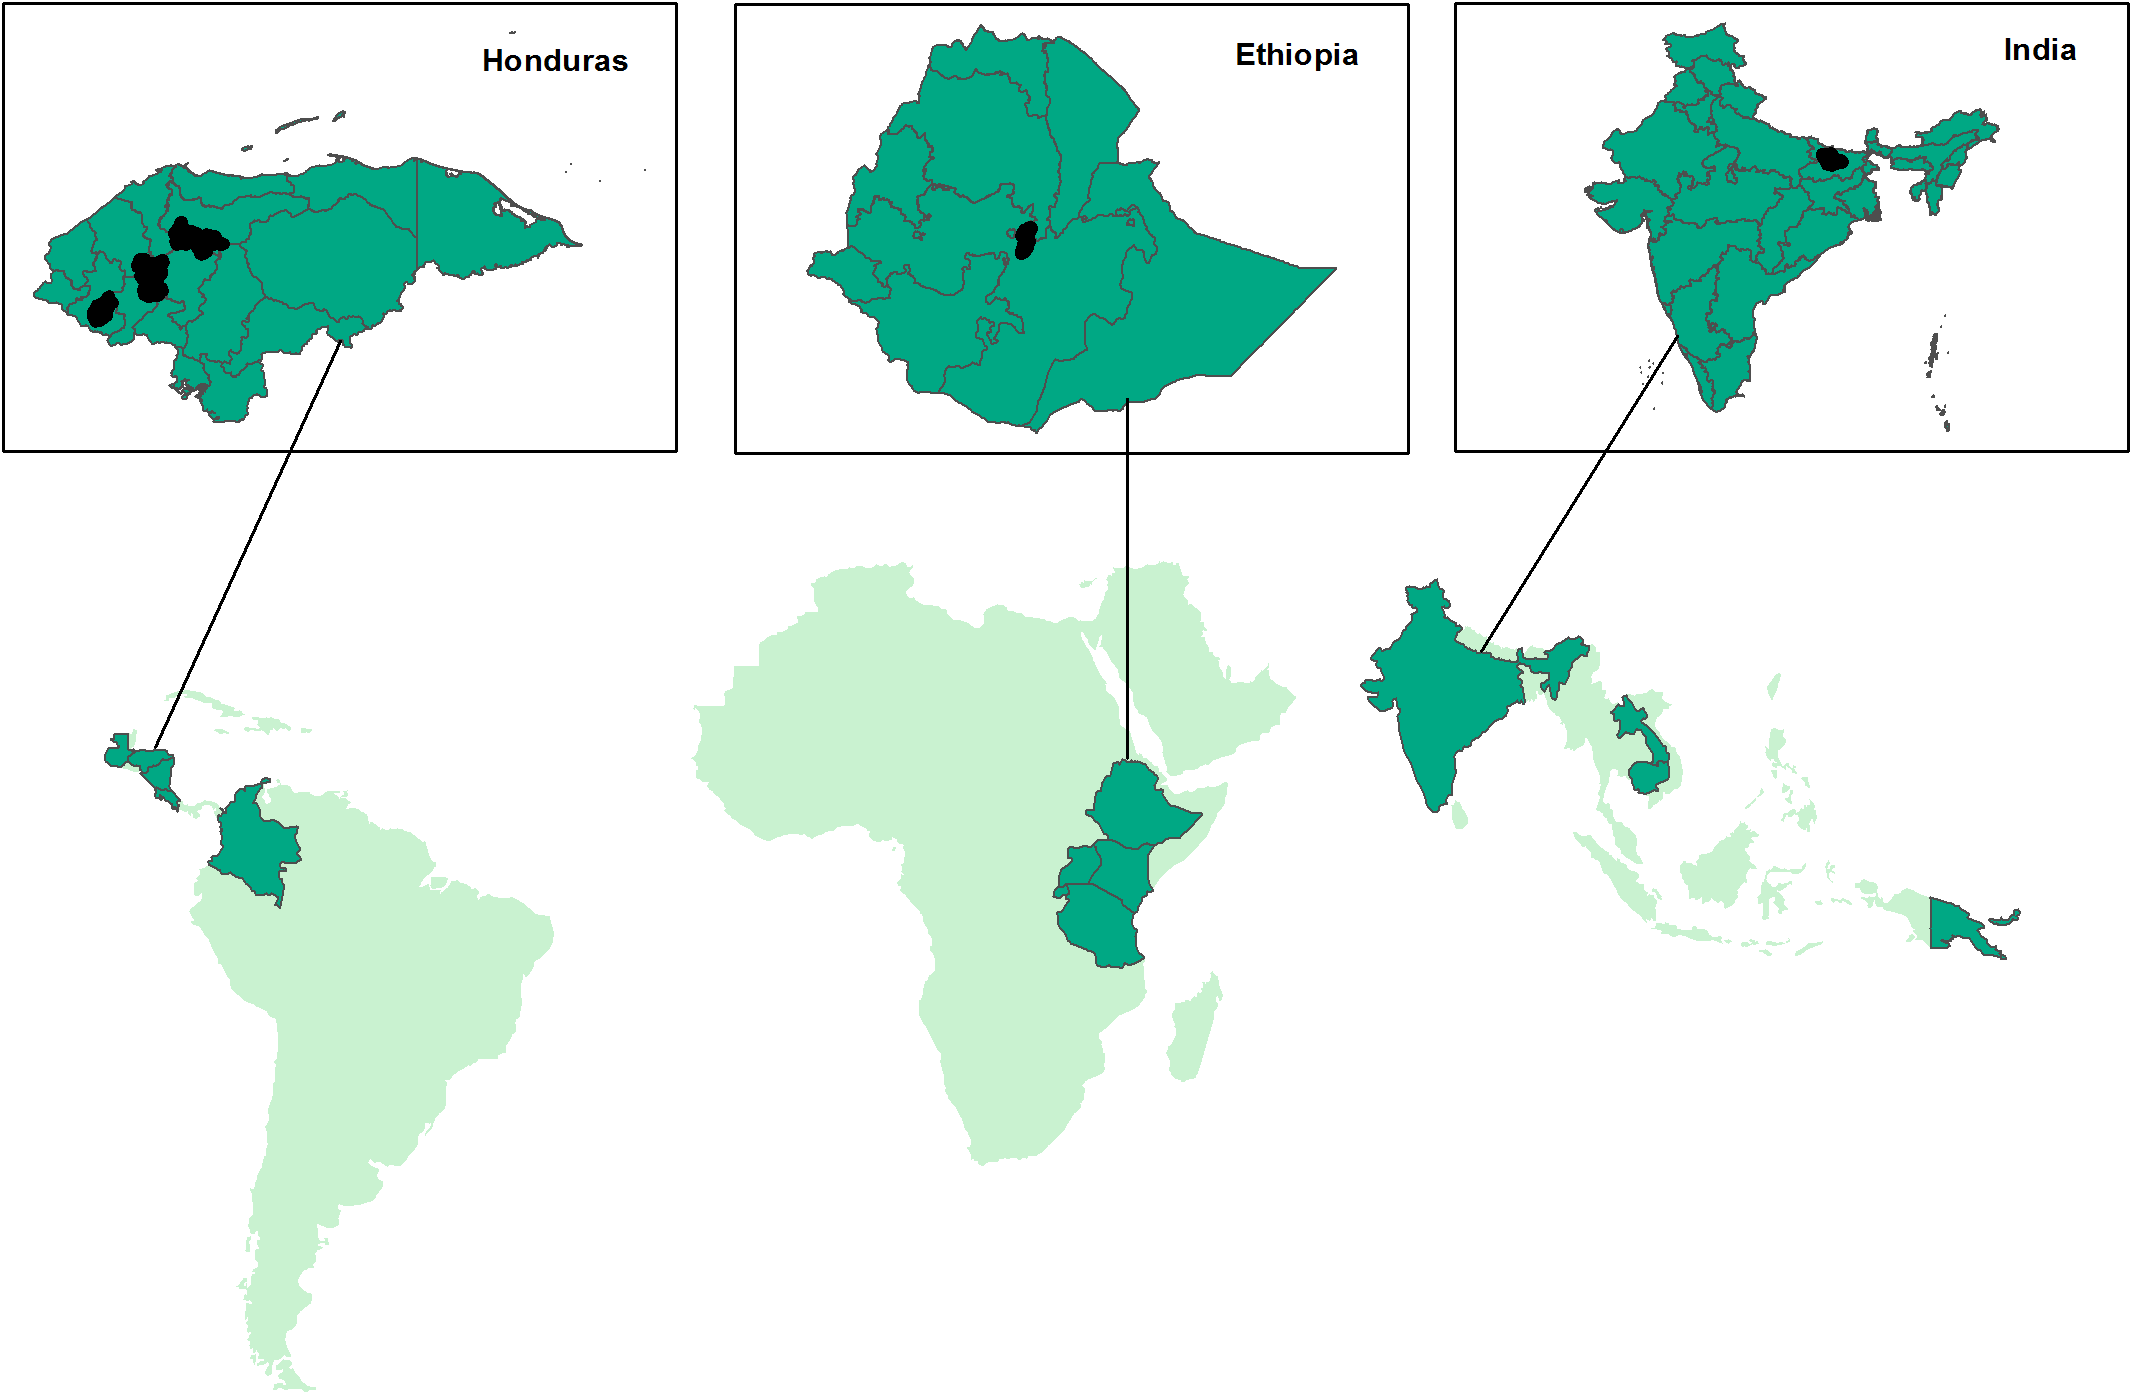 Map of locations of study participants in Honduras, Ethiopia, and India.